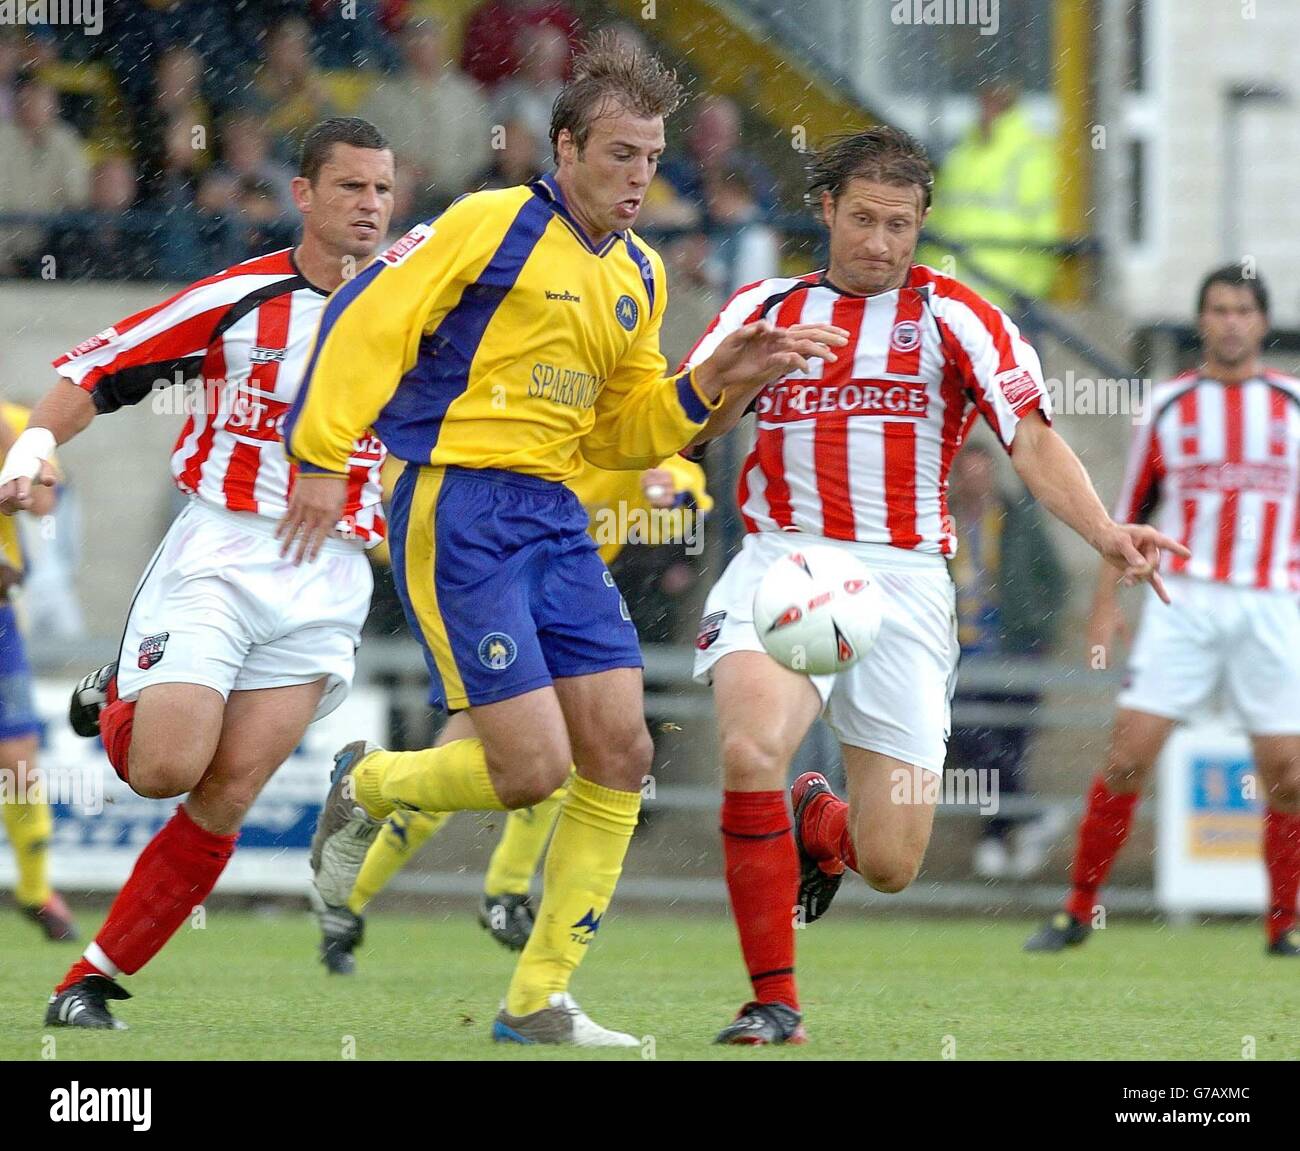 Bruno Meirelles of Torquay is challenged by Stewart Talbot & Chris Hargreaves of Brentford, during their Coca Cola League One match at Plainmoor, Torquay, Saturday, September 11, 2004. . Stock Photo